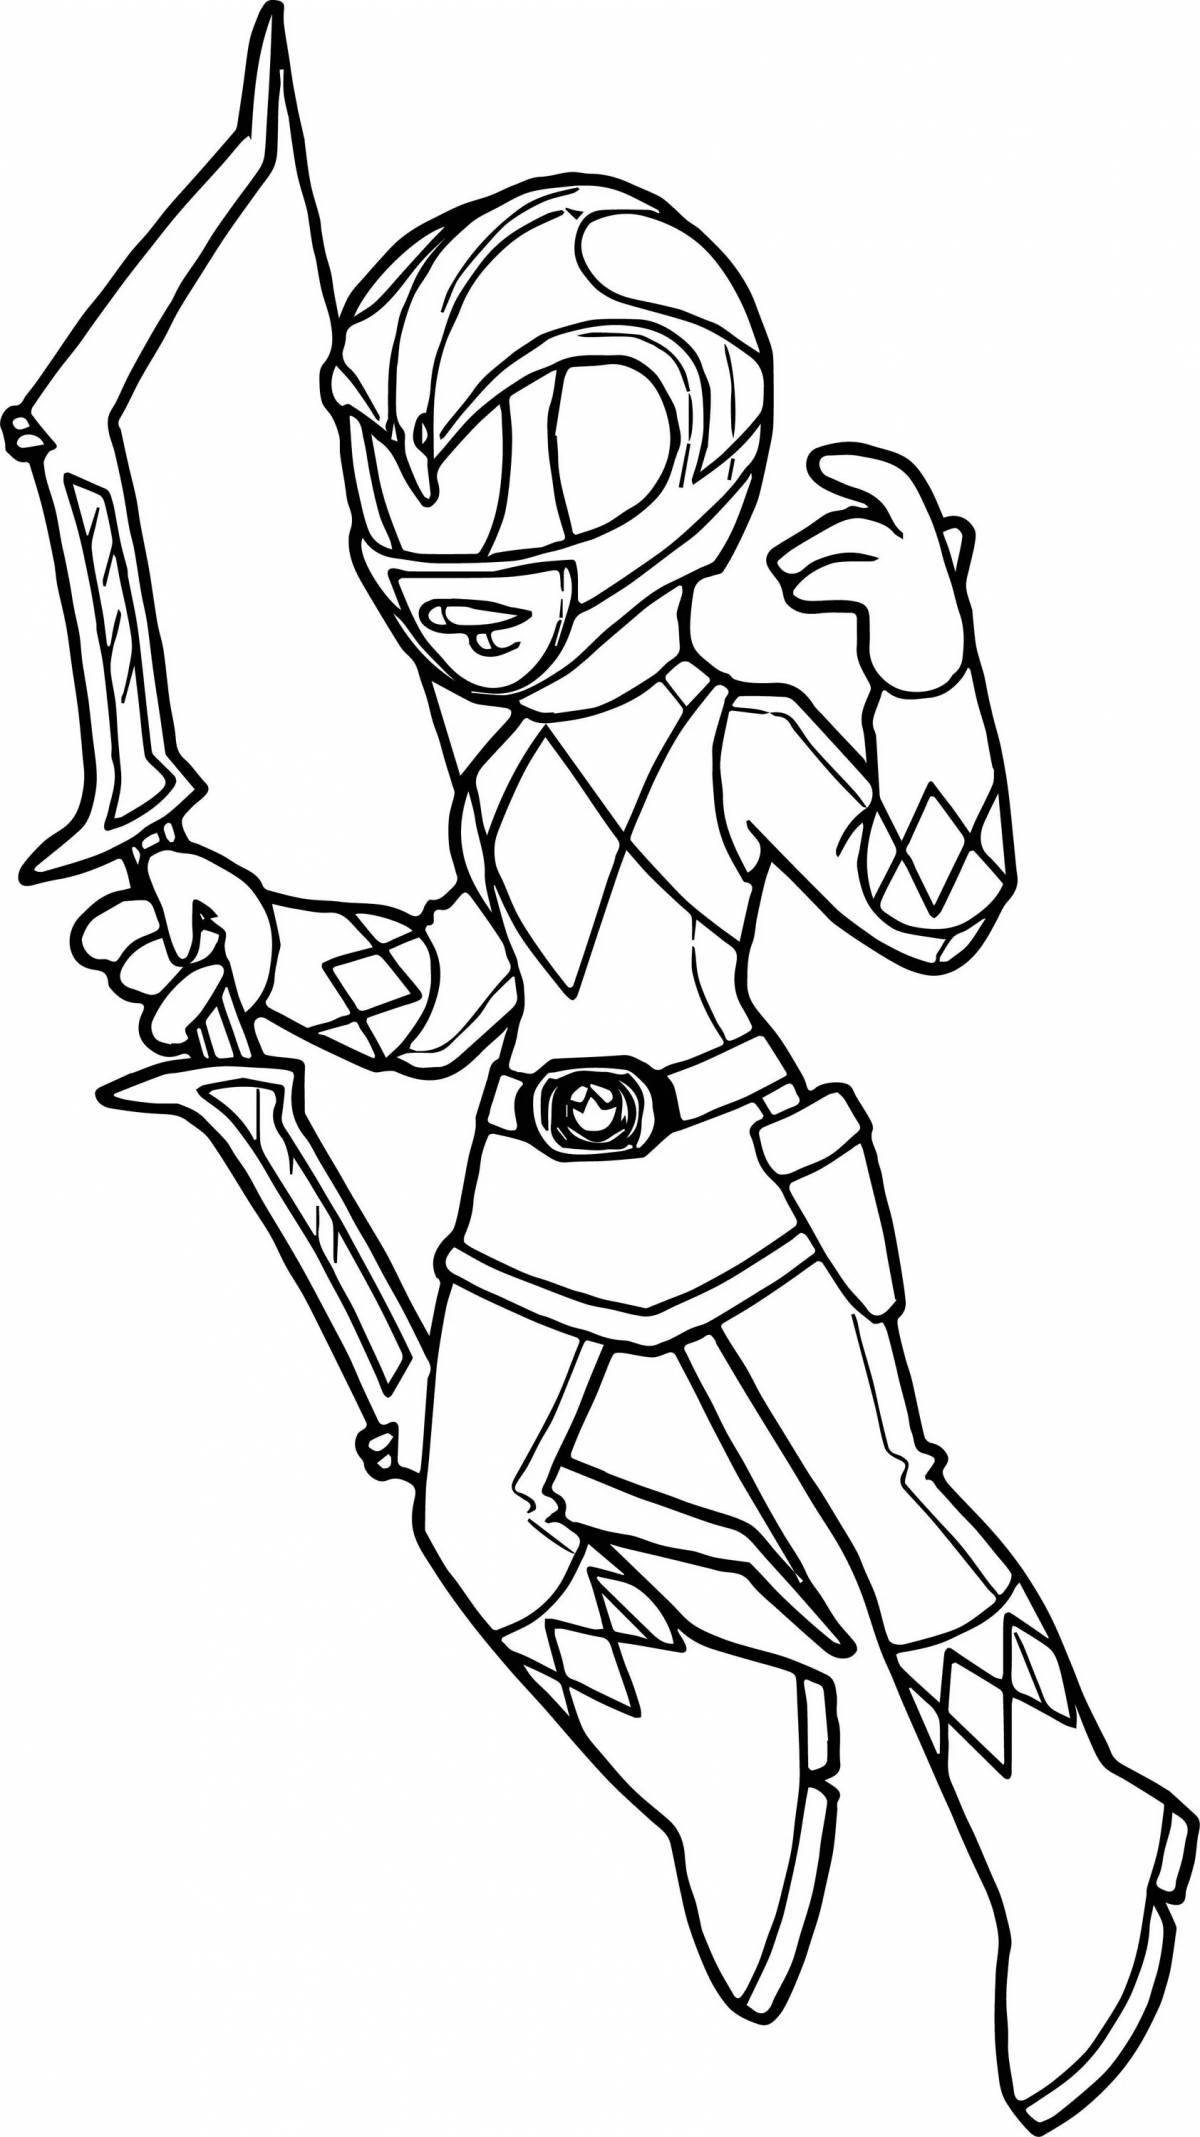 Roger Ranger Vibrant Coloring Page